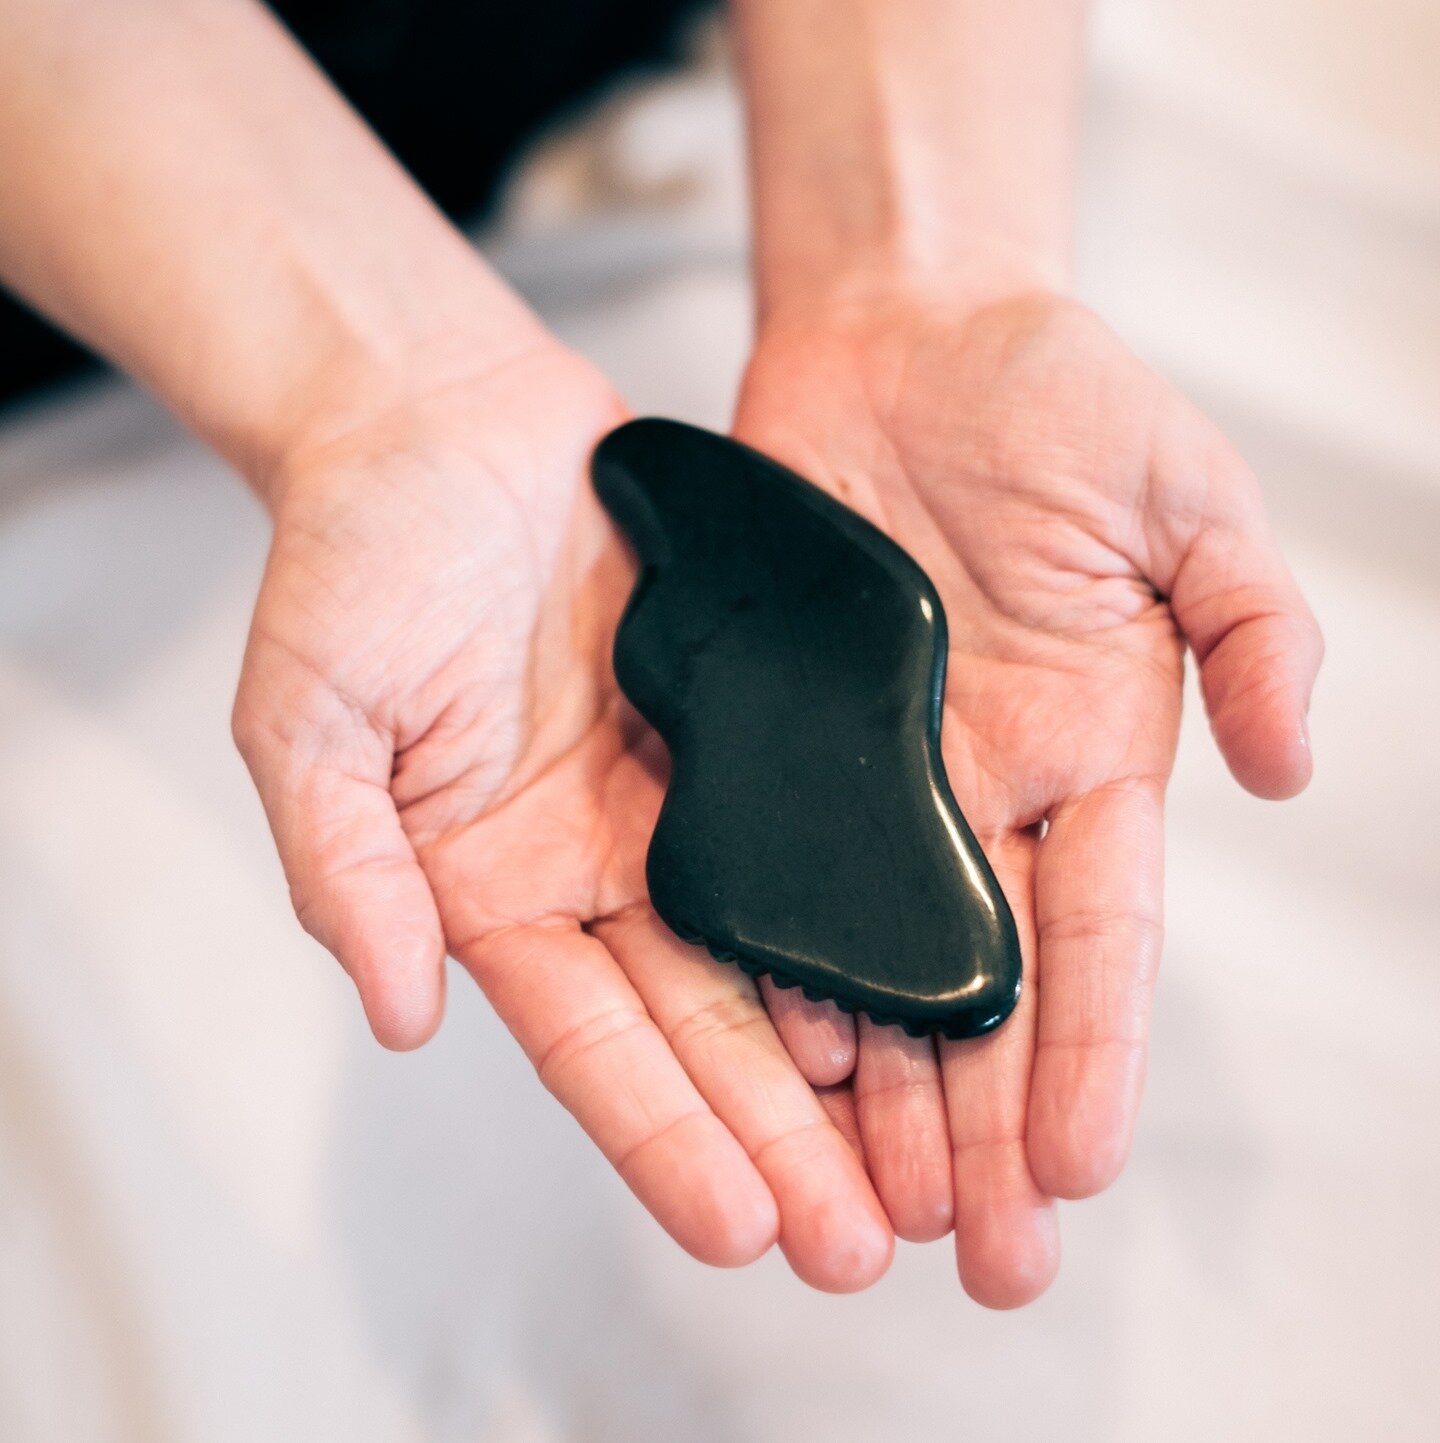 Need a lift? Add Gua Sha to any facial for tighter, lifted, younger looking skin!